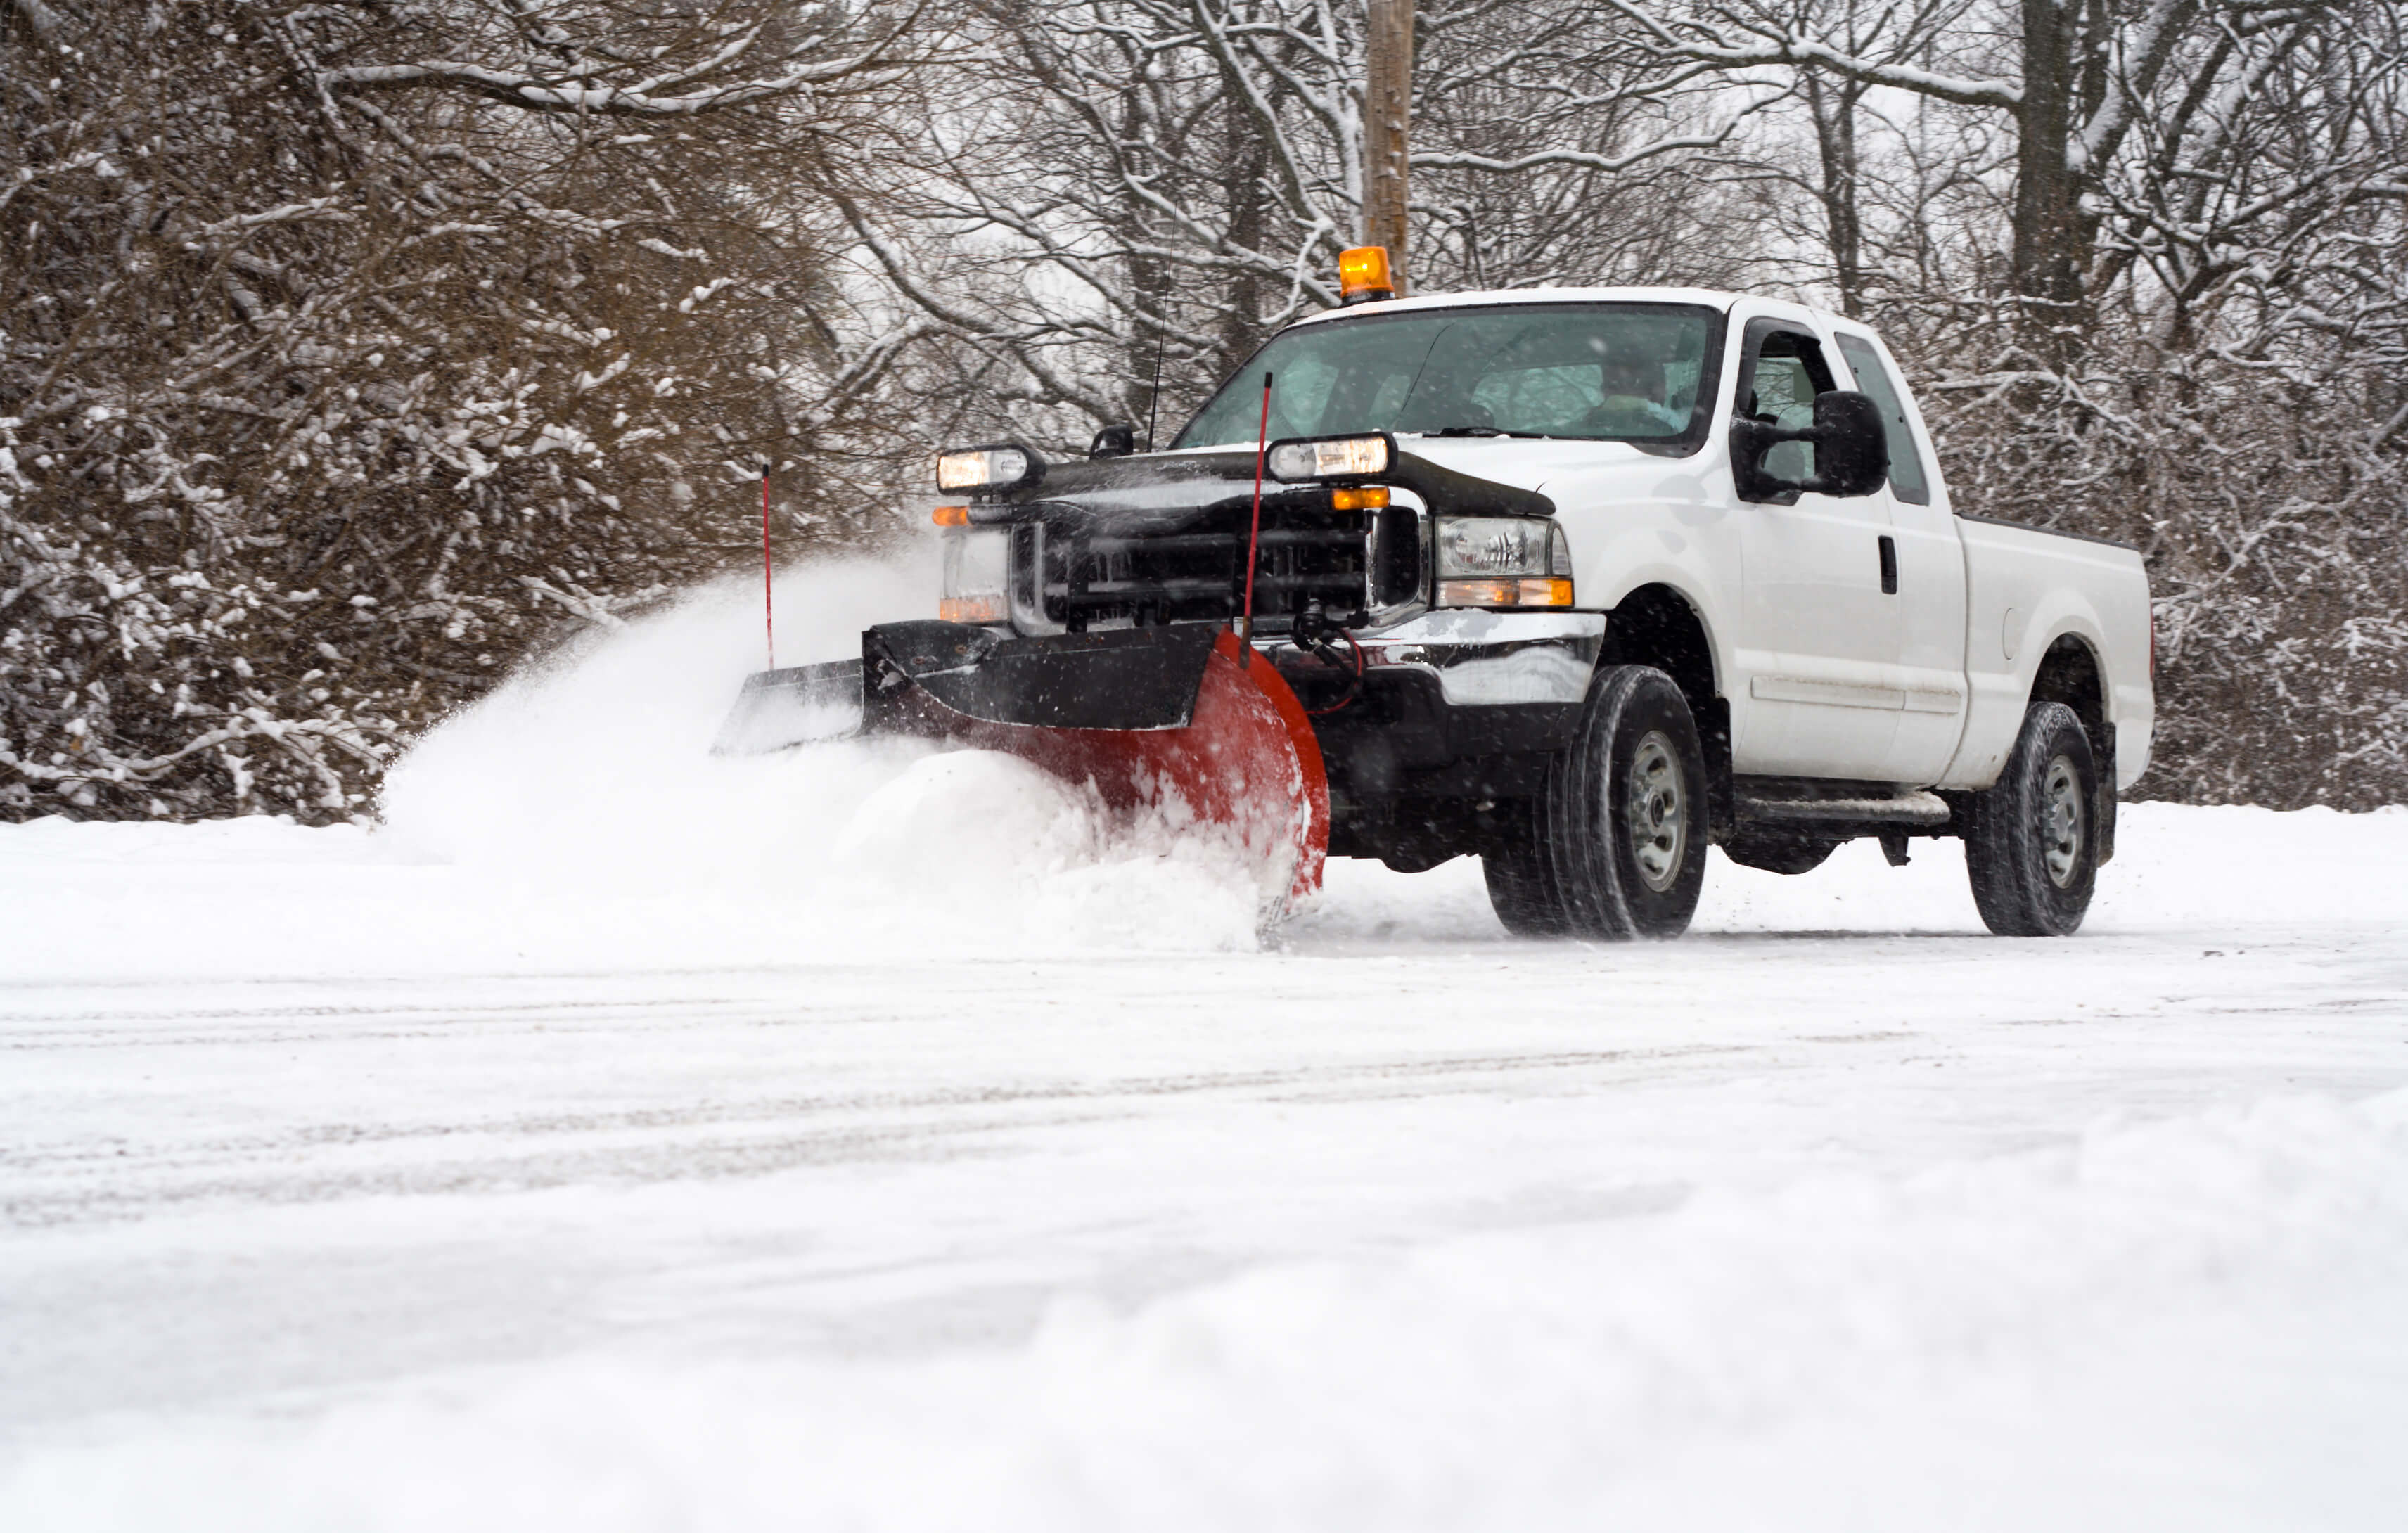 Snow Removal Services in & around Milwaukee J.R. Boehlke, Inc. Mequon